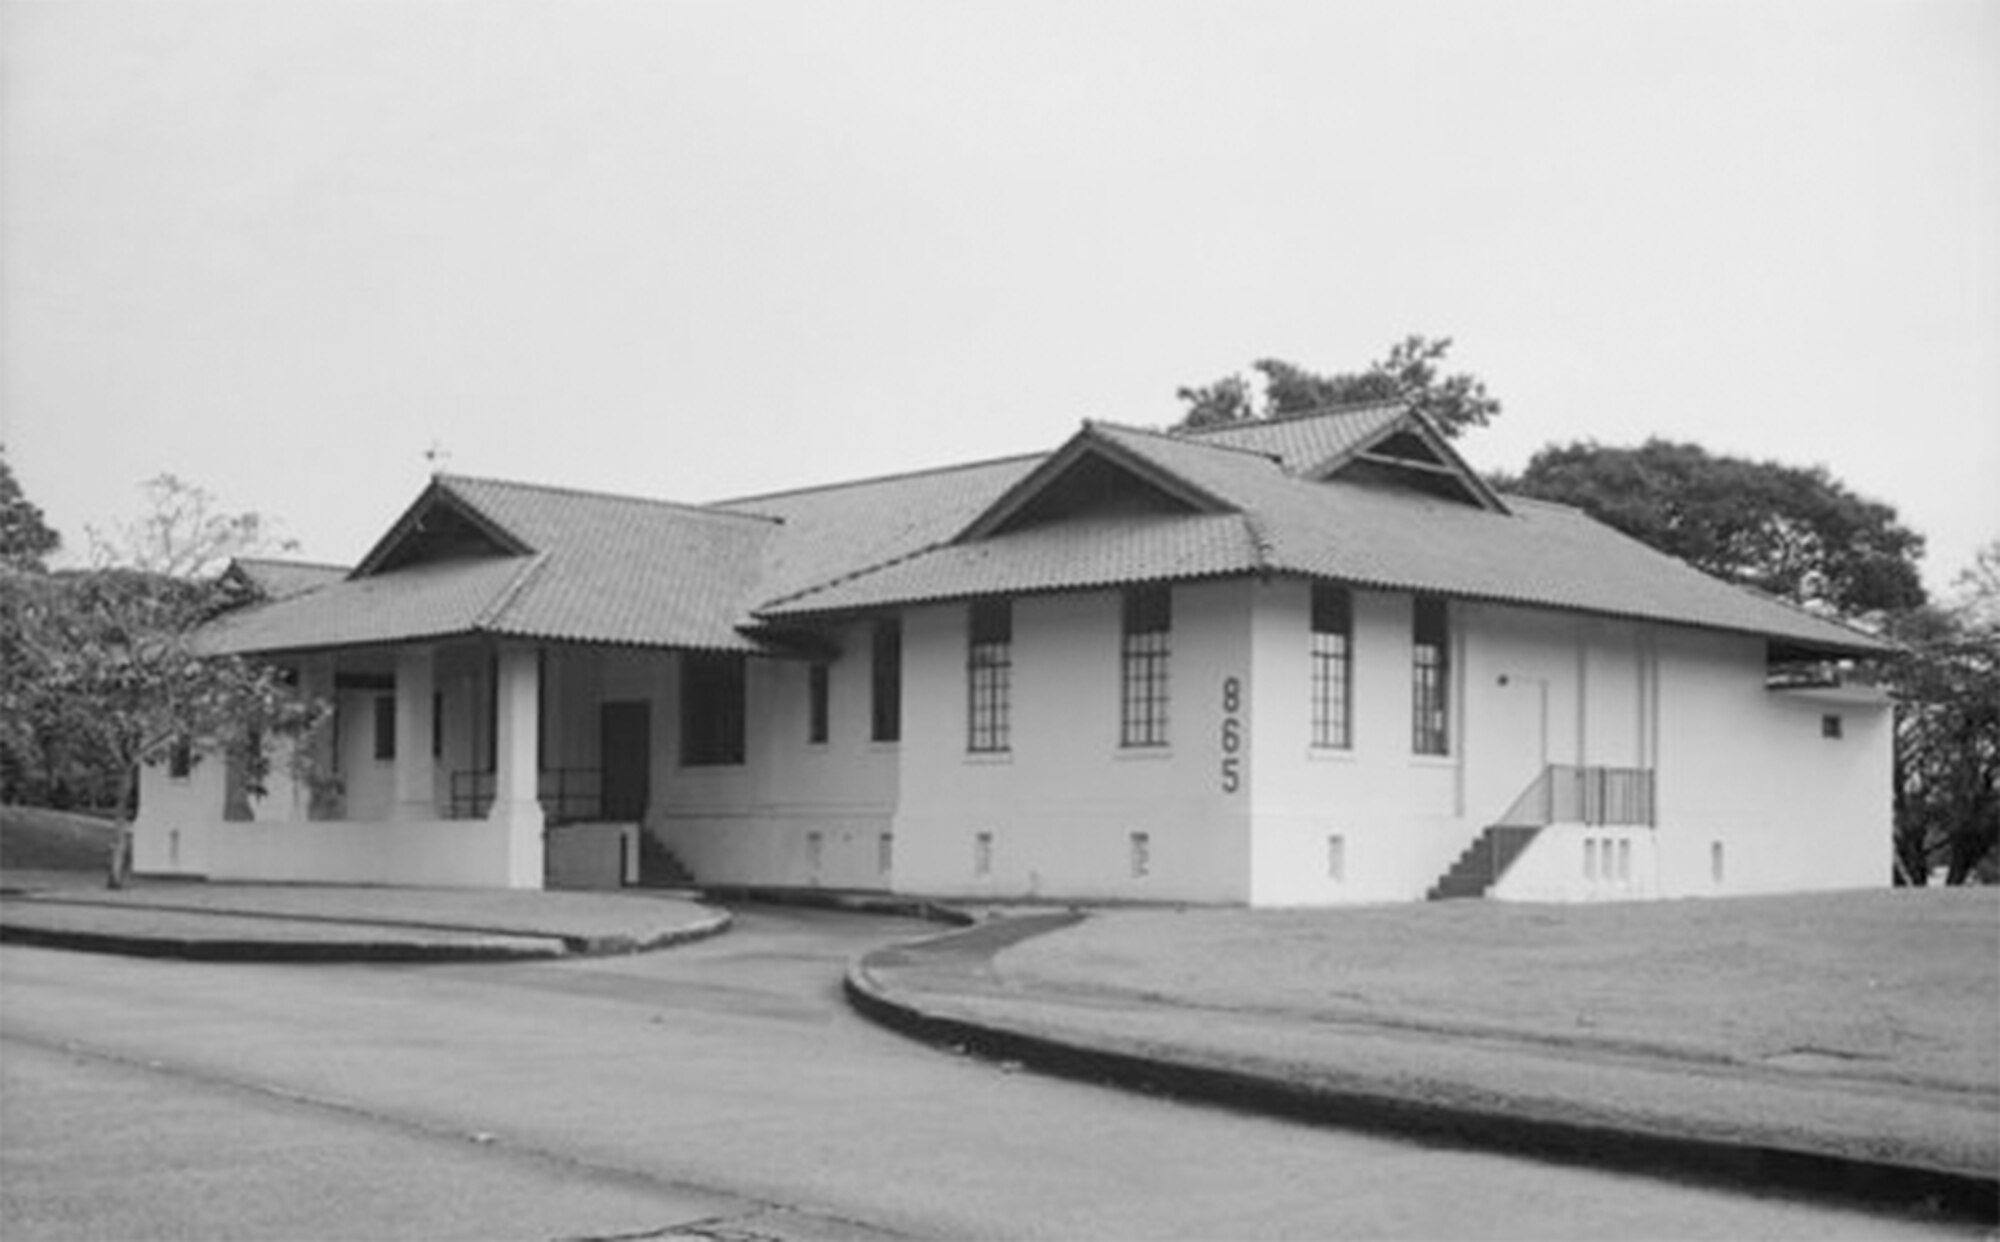 The Albrook Air Force Base Dispensary (Building 865), which provided medical service to not only Air Force personnel and dependents, but also to Latin American personnel in attendance at the Air Force School for Latin America (later known as the School for the Americas). (Photo courtesy of the Library of Congress)